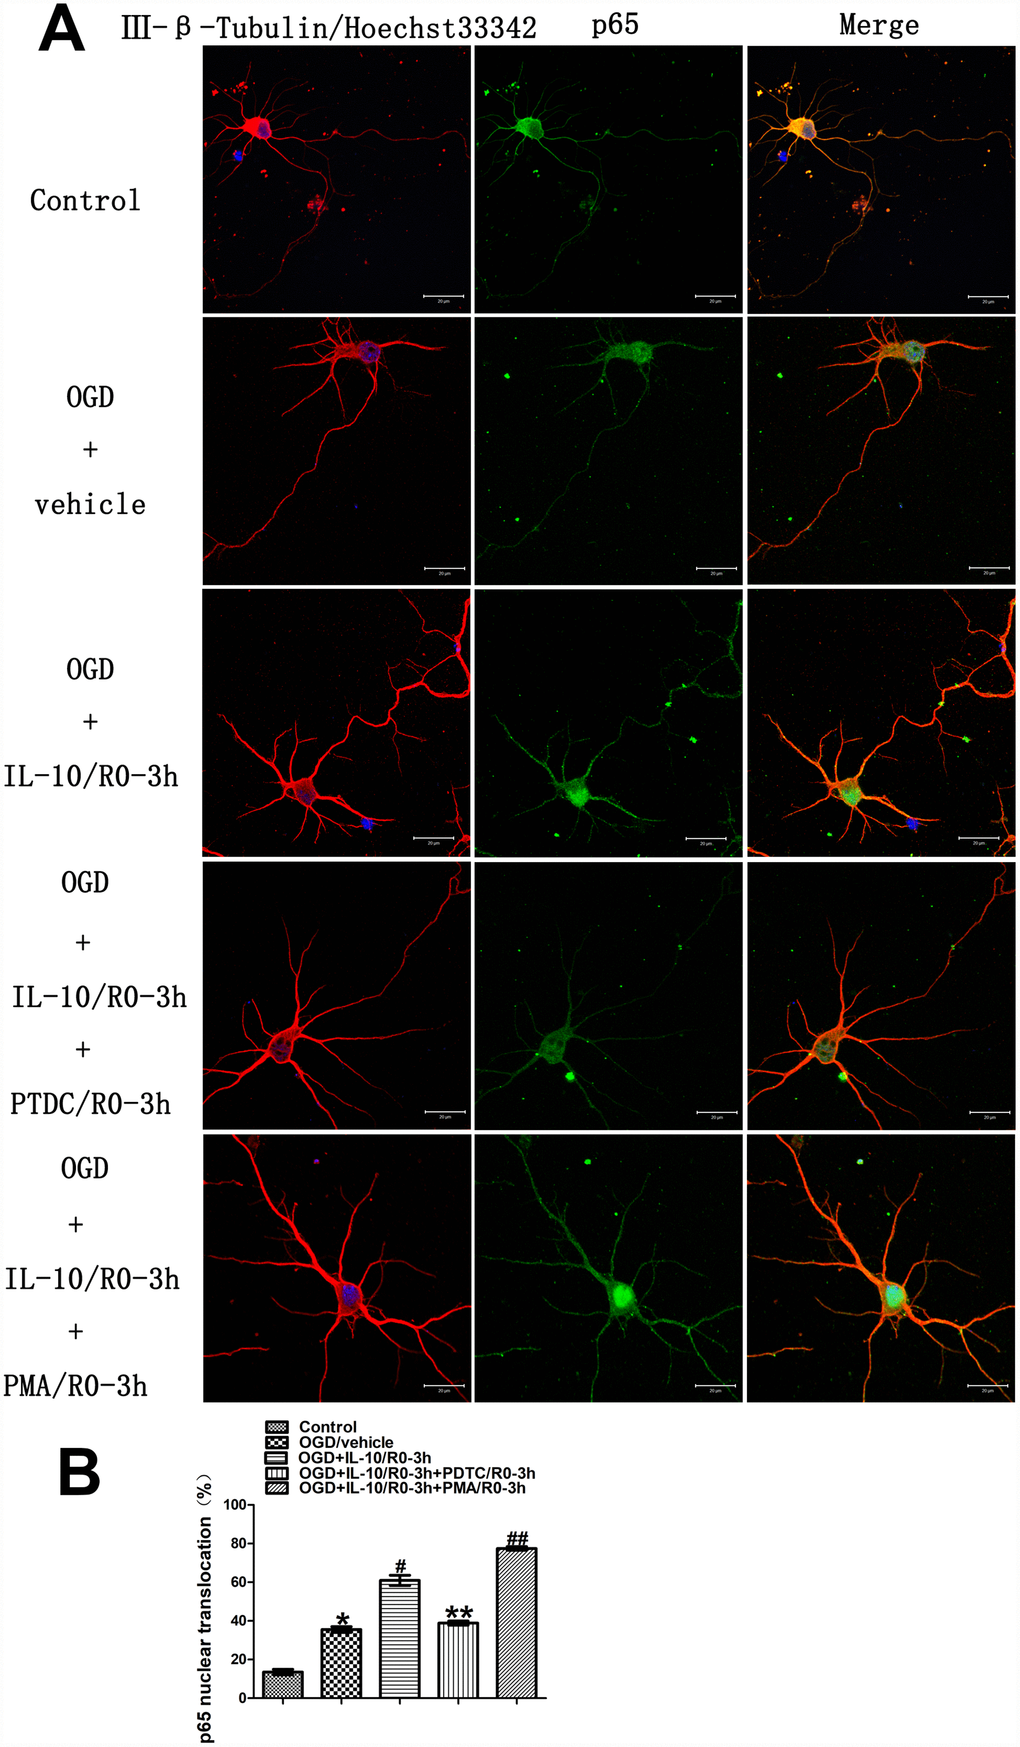 Localization and nuclear translocation of p65 at an early stage after OGD injury. (A) Representative images of each group. The left column displays neuronal marker class Ⅲ-β-Tubulin (red) and nucleus (blue). The middle column shows expression of p65 (green). The right column indicates the co-localization of class Ⅲ-β-Tubulin, nucleus and P65. Scale bar is 20 μm. (B) Quantification of p65 nuclear translocation. *p#pp##pp